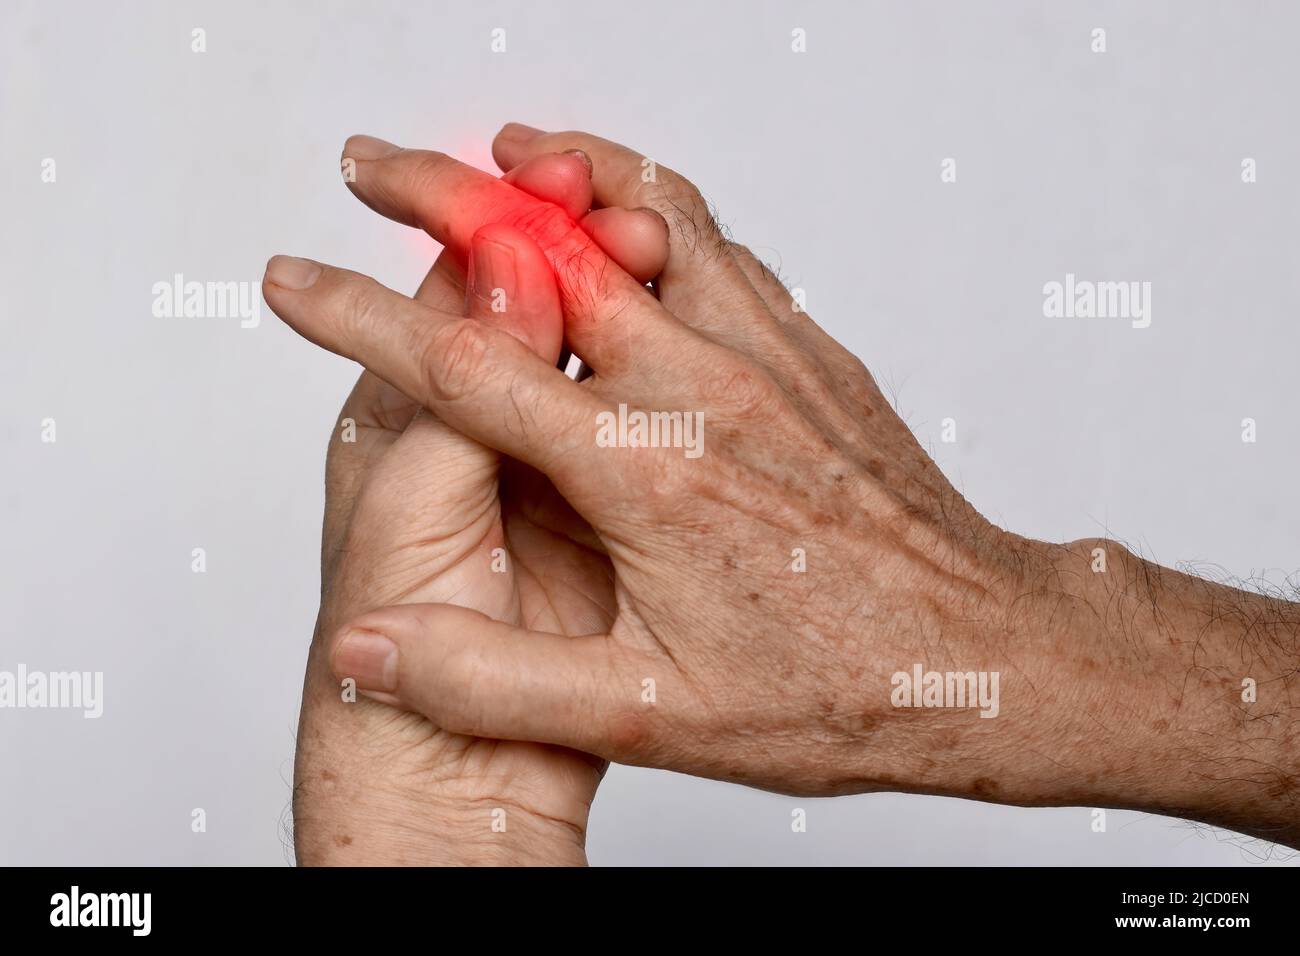 Inflammation of Asian old man middle finger and hand. Concept of arthritis or cellulitis. Stock Photo